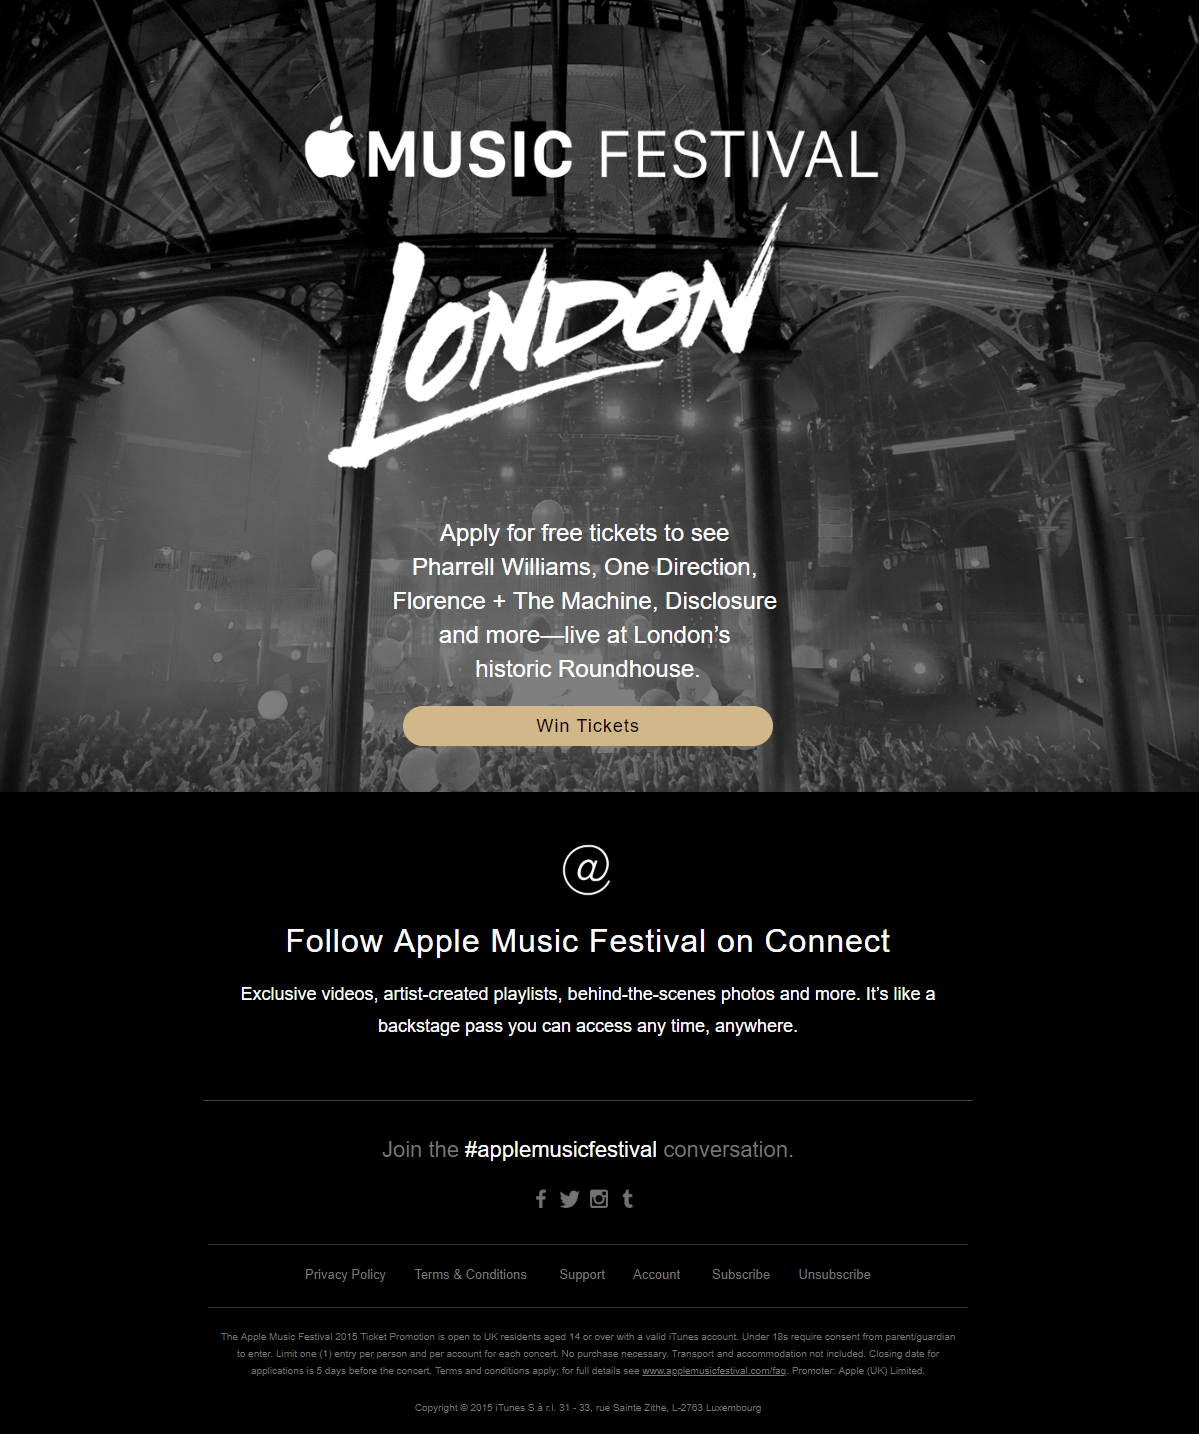 Apple Music Festival giveaway email